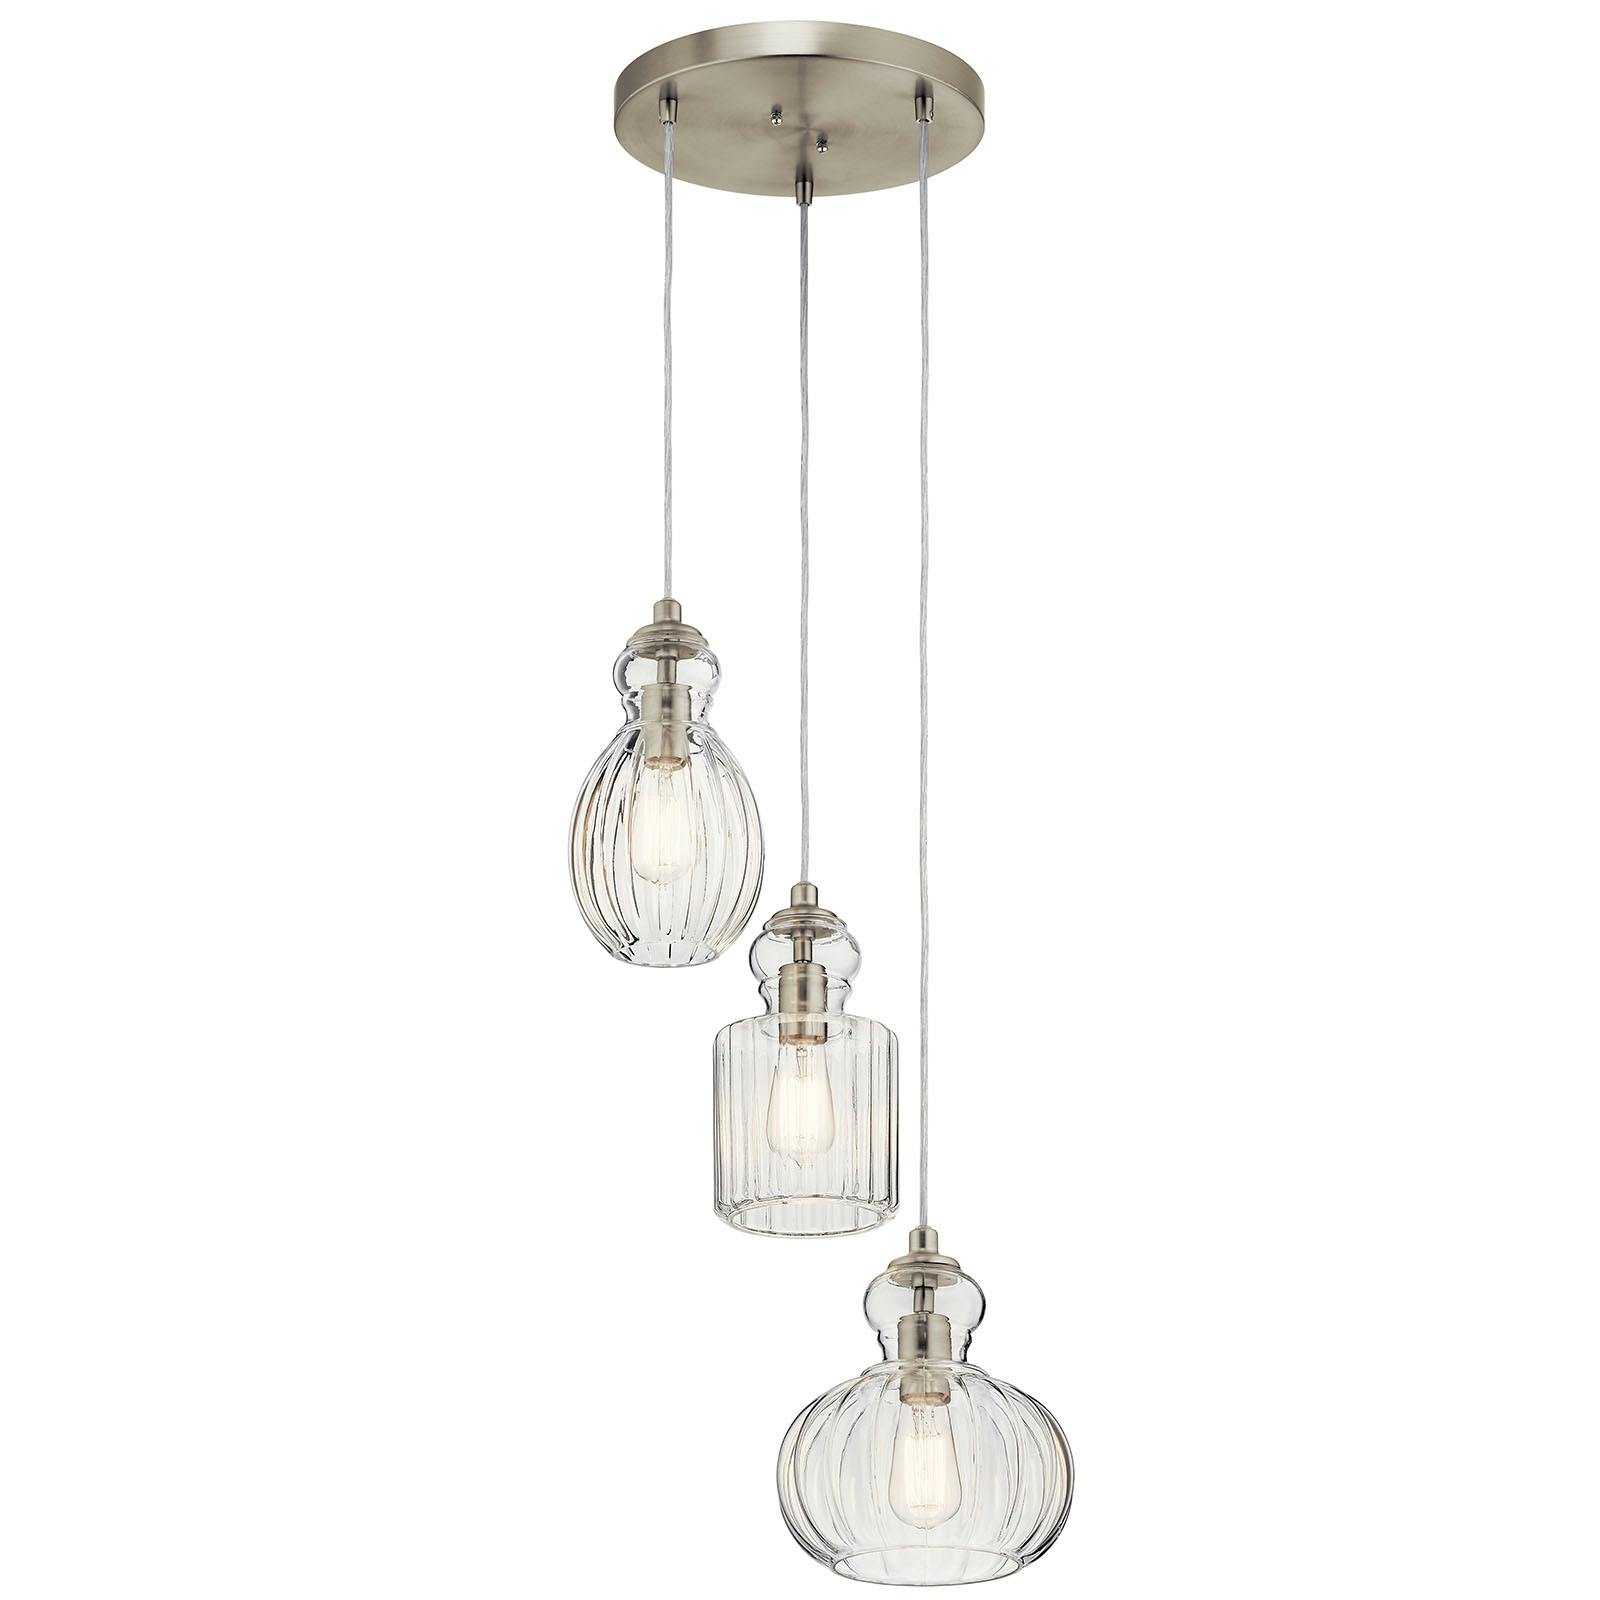 Riviera 10.25" 3 Light Pendant in Nickel on a white background